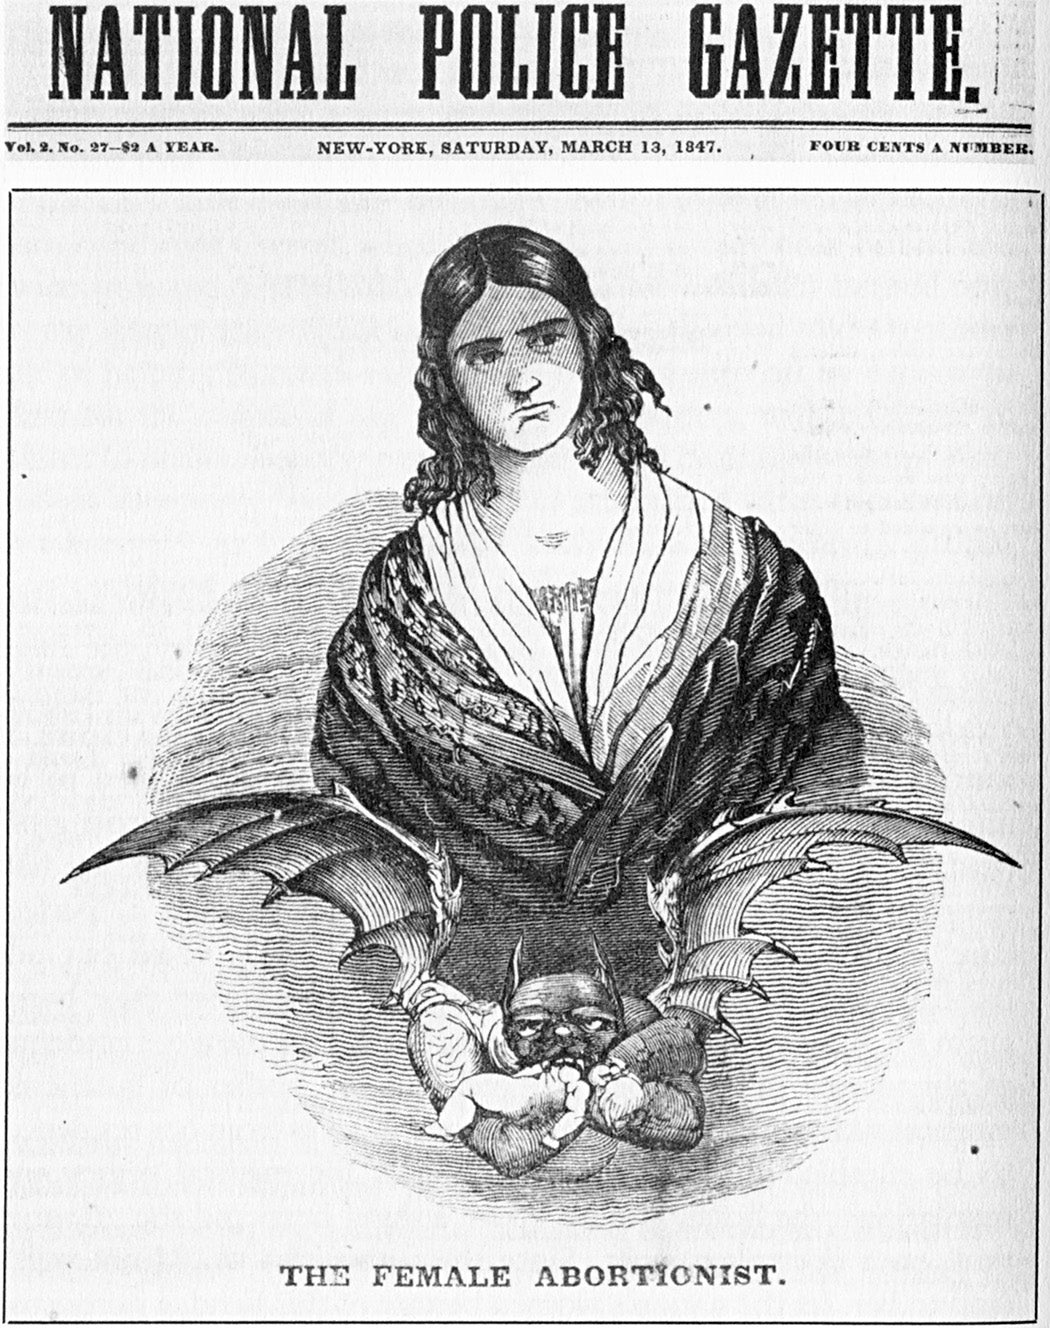 Abortionist Ann Lohman (a.k.a. Madame Restell) as imagined in the 13 March 1847 edition of the National Police Gazette